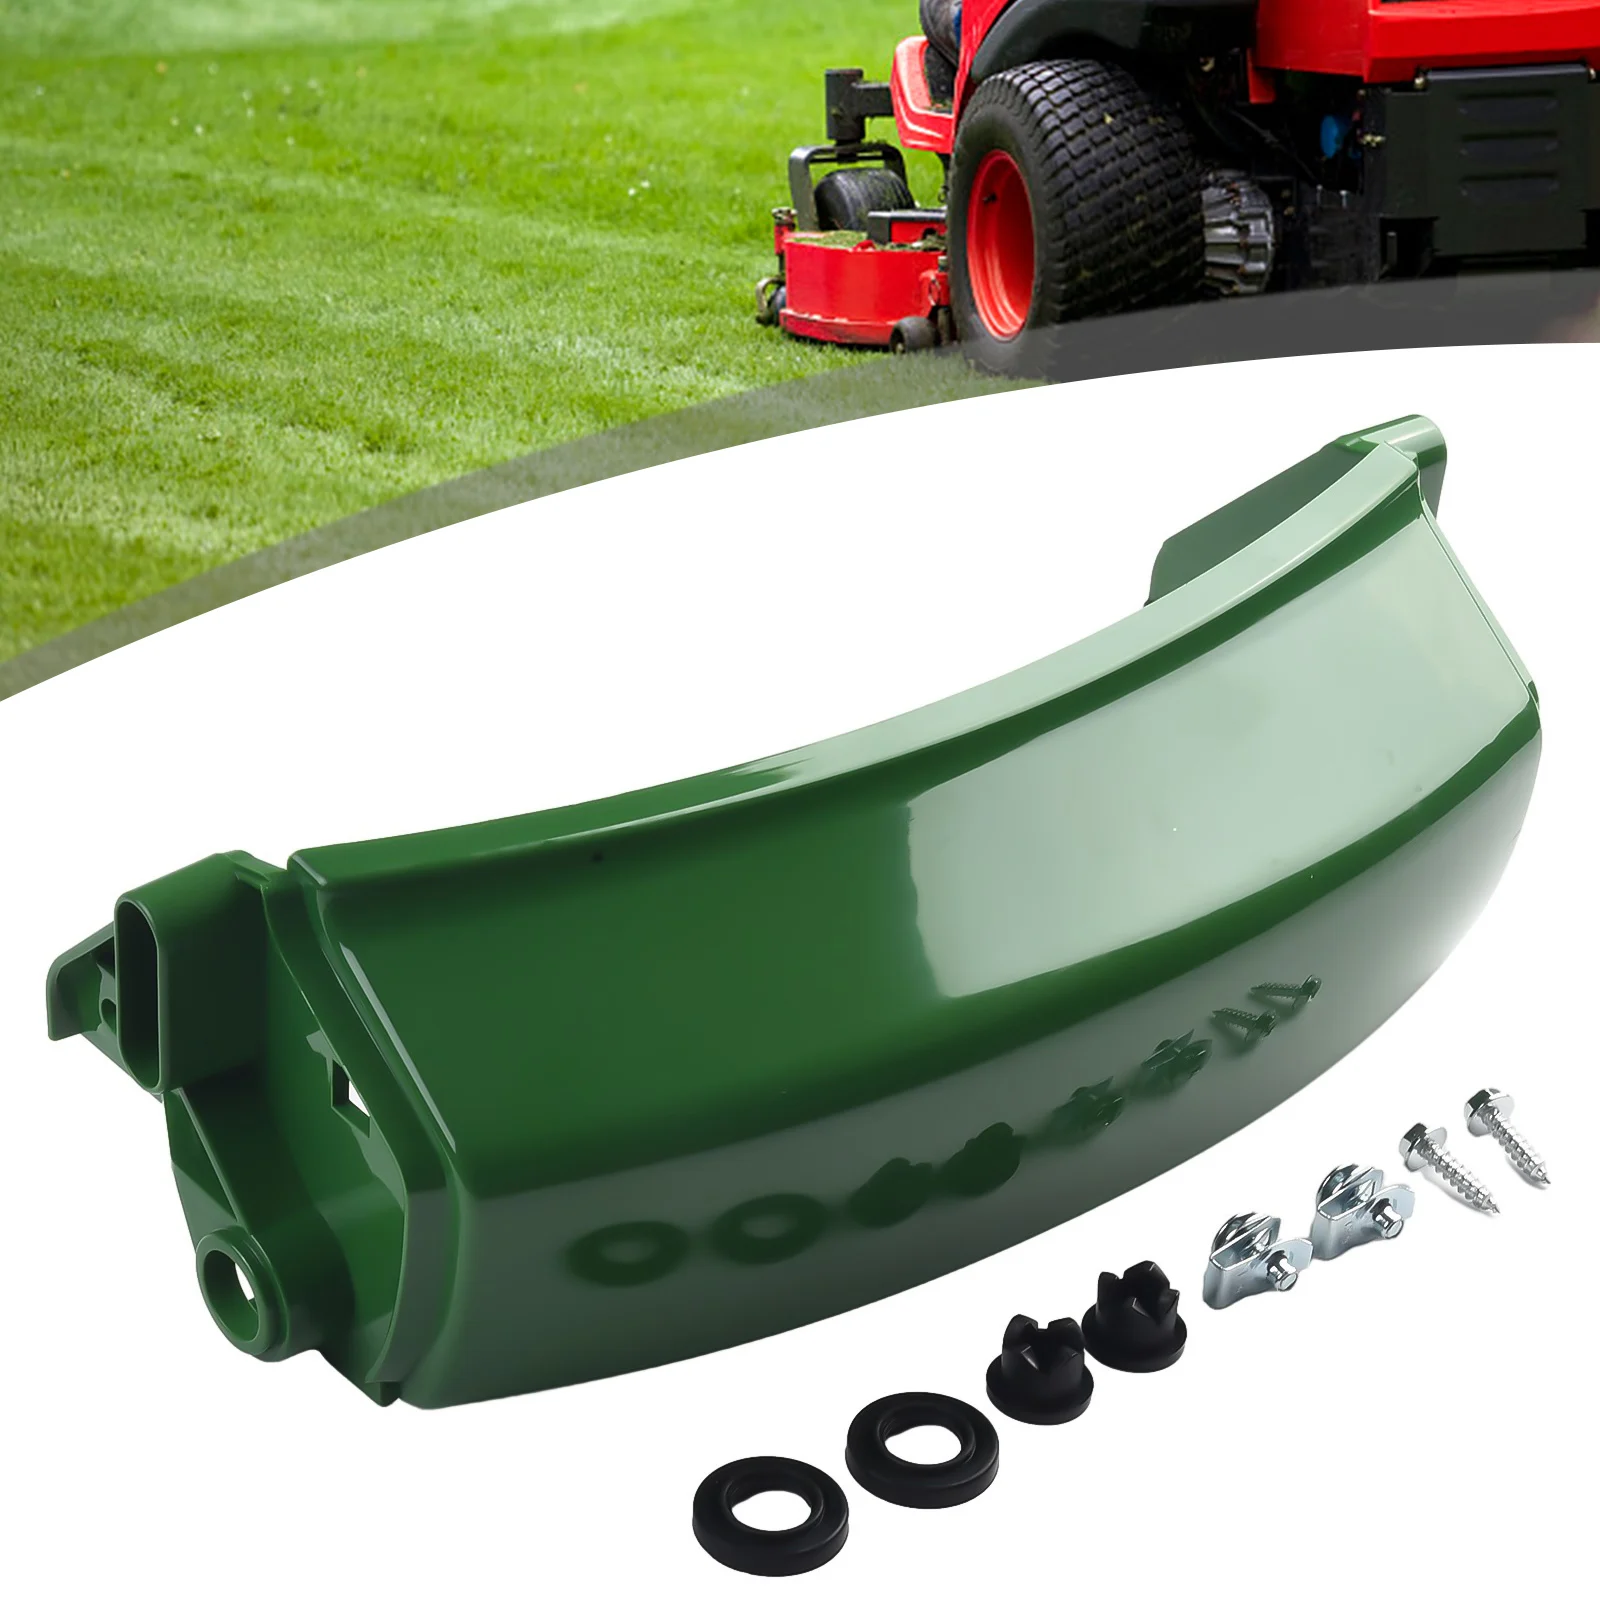 

1Set Tractor Front Bumper With Upper Hood Kit For LT133 LT155 LT166 LT150 LT160 LT170 LT180 LT190 AM132530 AM128998 Garden Tool